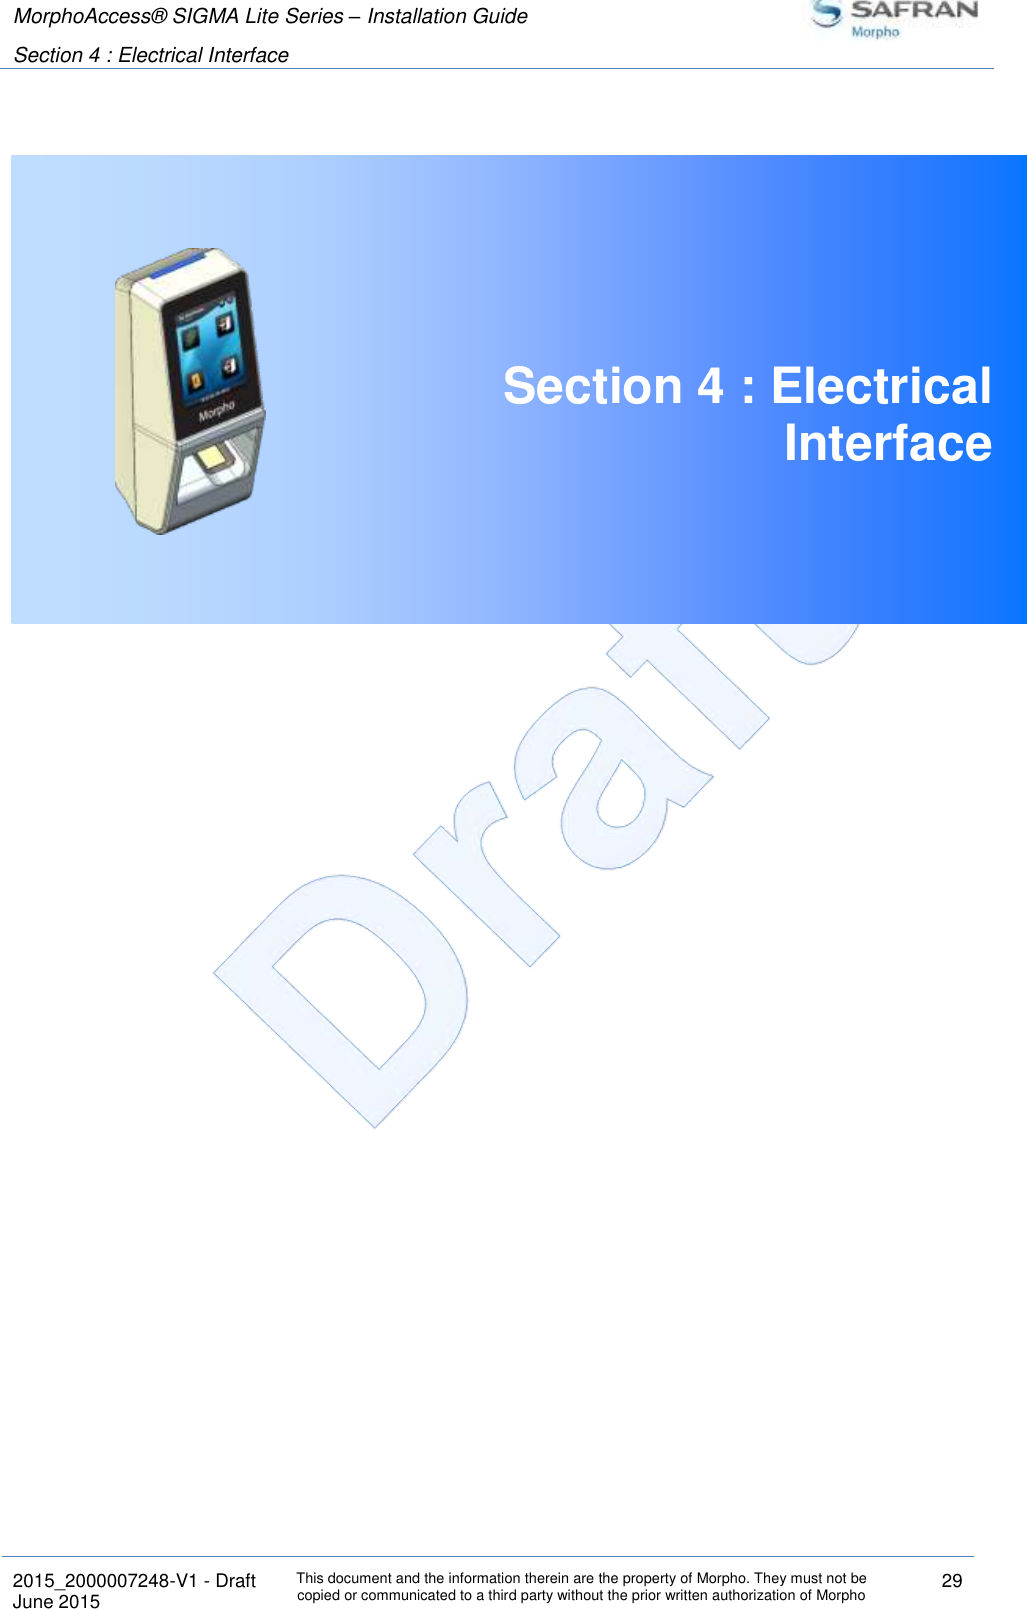 MorphoAccess® SIGMA Lite Series – Installation Guide  Section 4 : Electrical Interface   2015_2000007248-V1 - Draft This document and the information therein are the property of Morpho. They must not be copied or communicated to a third party without the prior written authorization of Morpho 29 June 2015    Section 4 : Electrical Interface     